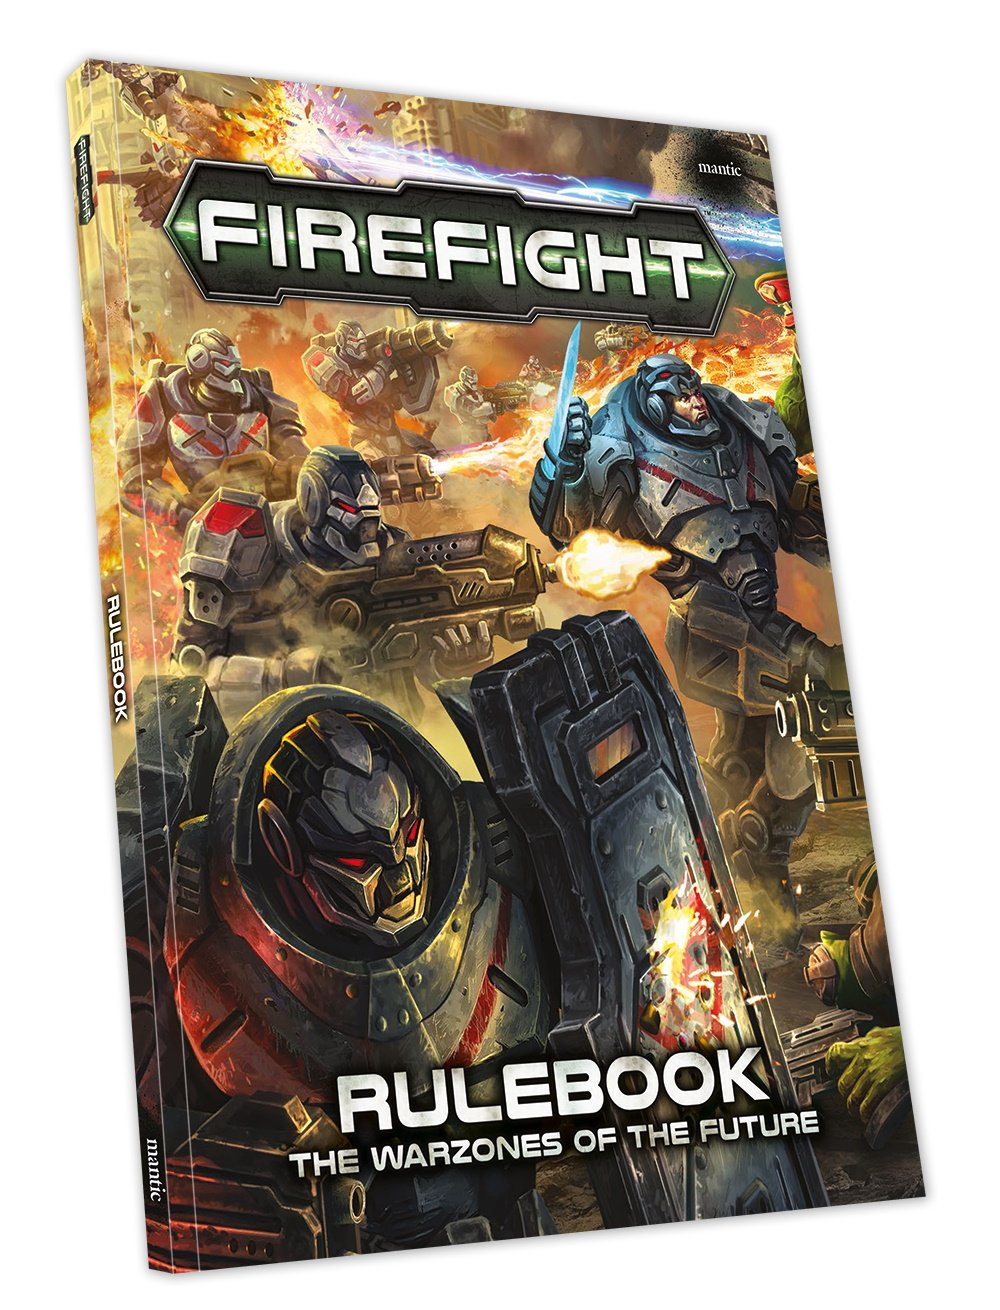 Firefight: Getting Started Free Rules